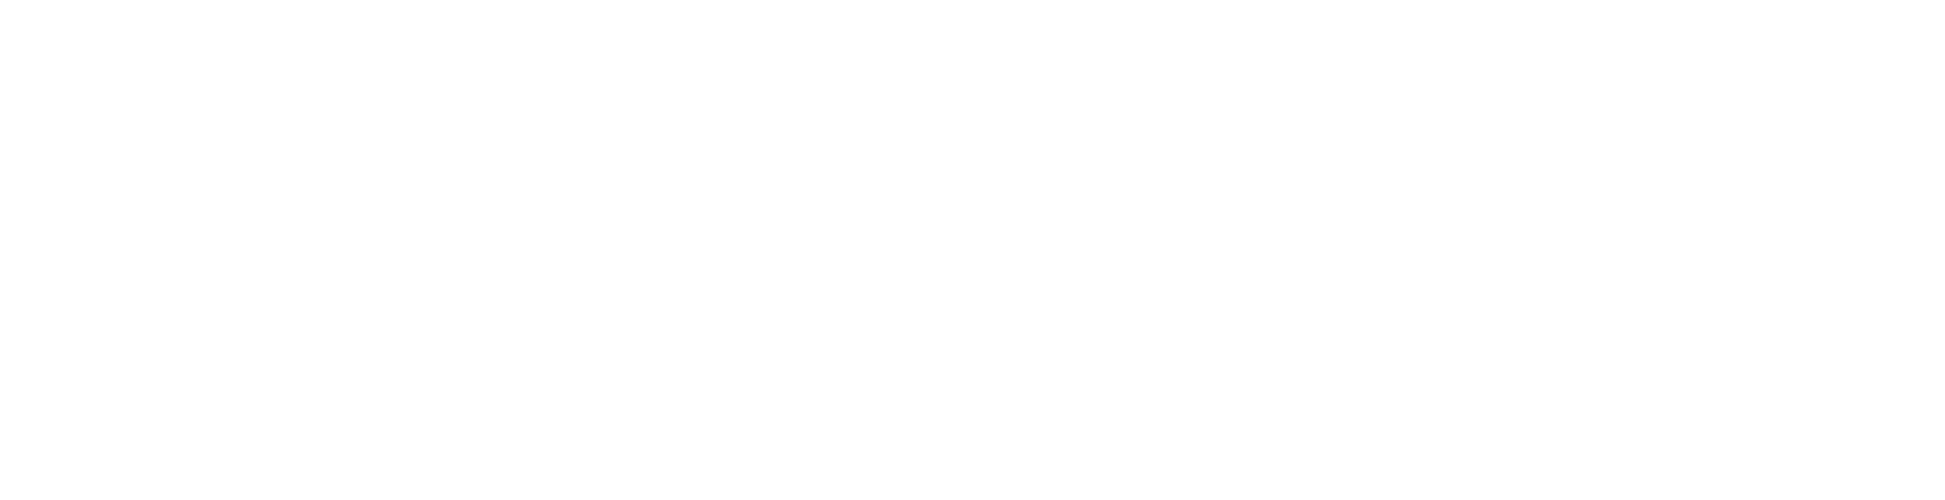 Logo for TNT Asphalt & General Contracting made from the letters T N and T. The second T has a dashed line running vertically up the middle so the letter resembles a paved road.